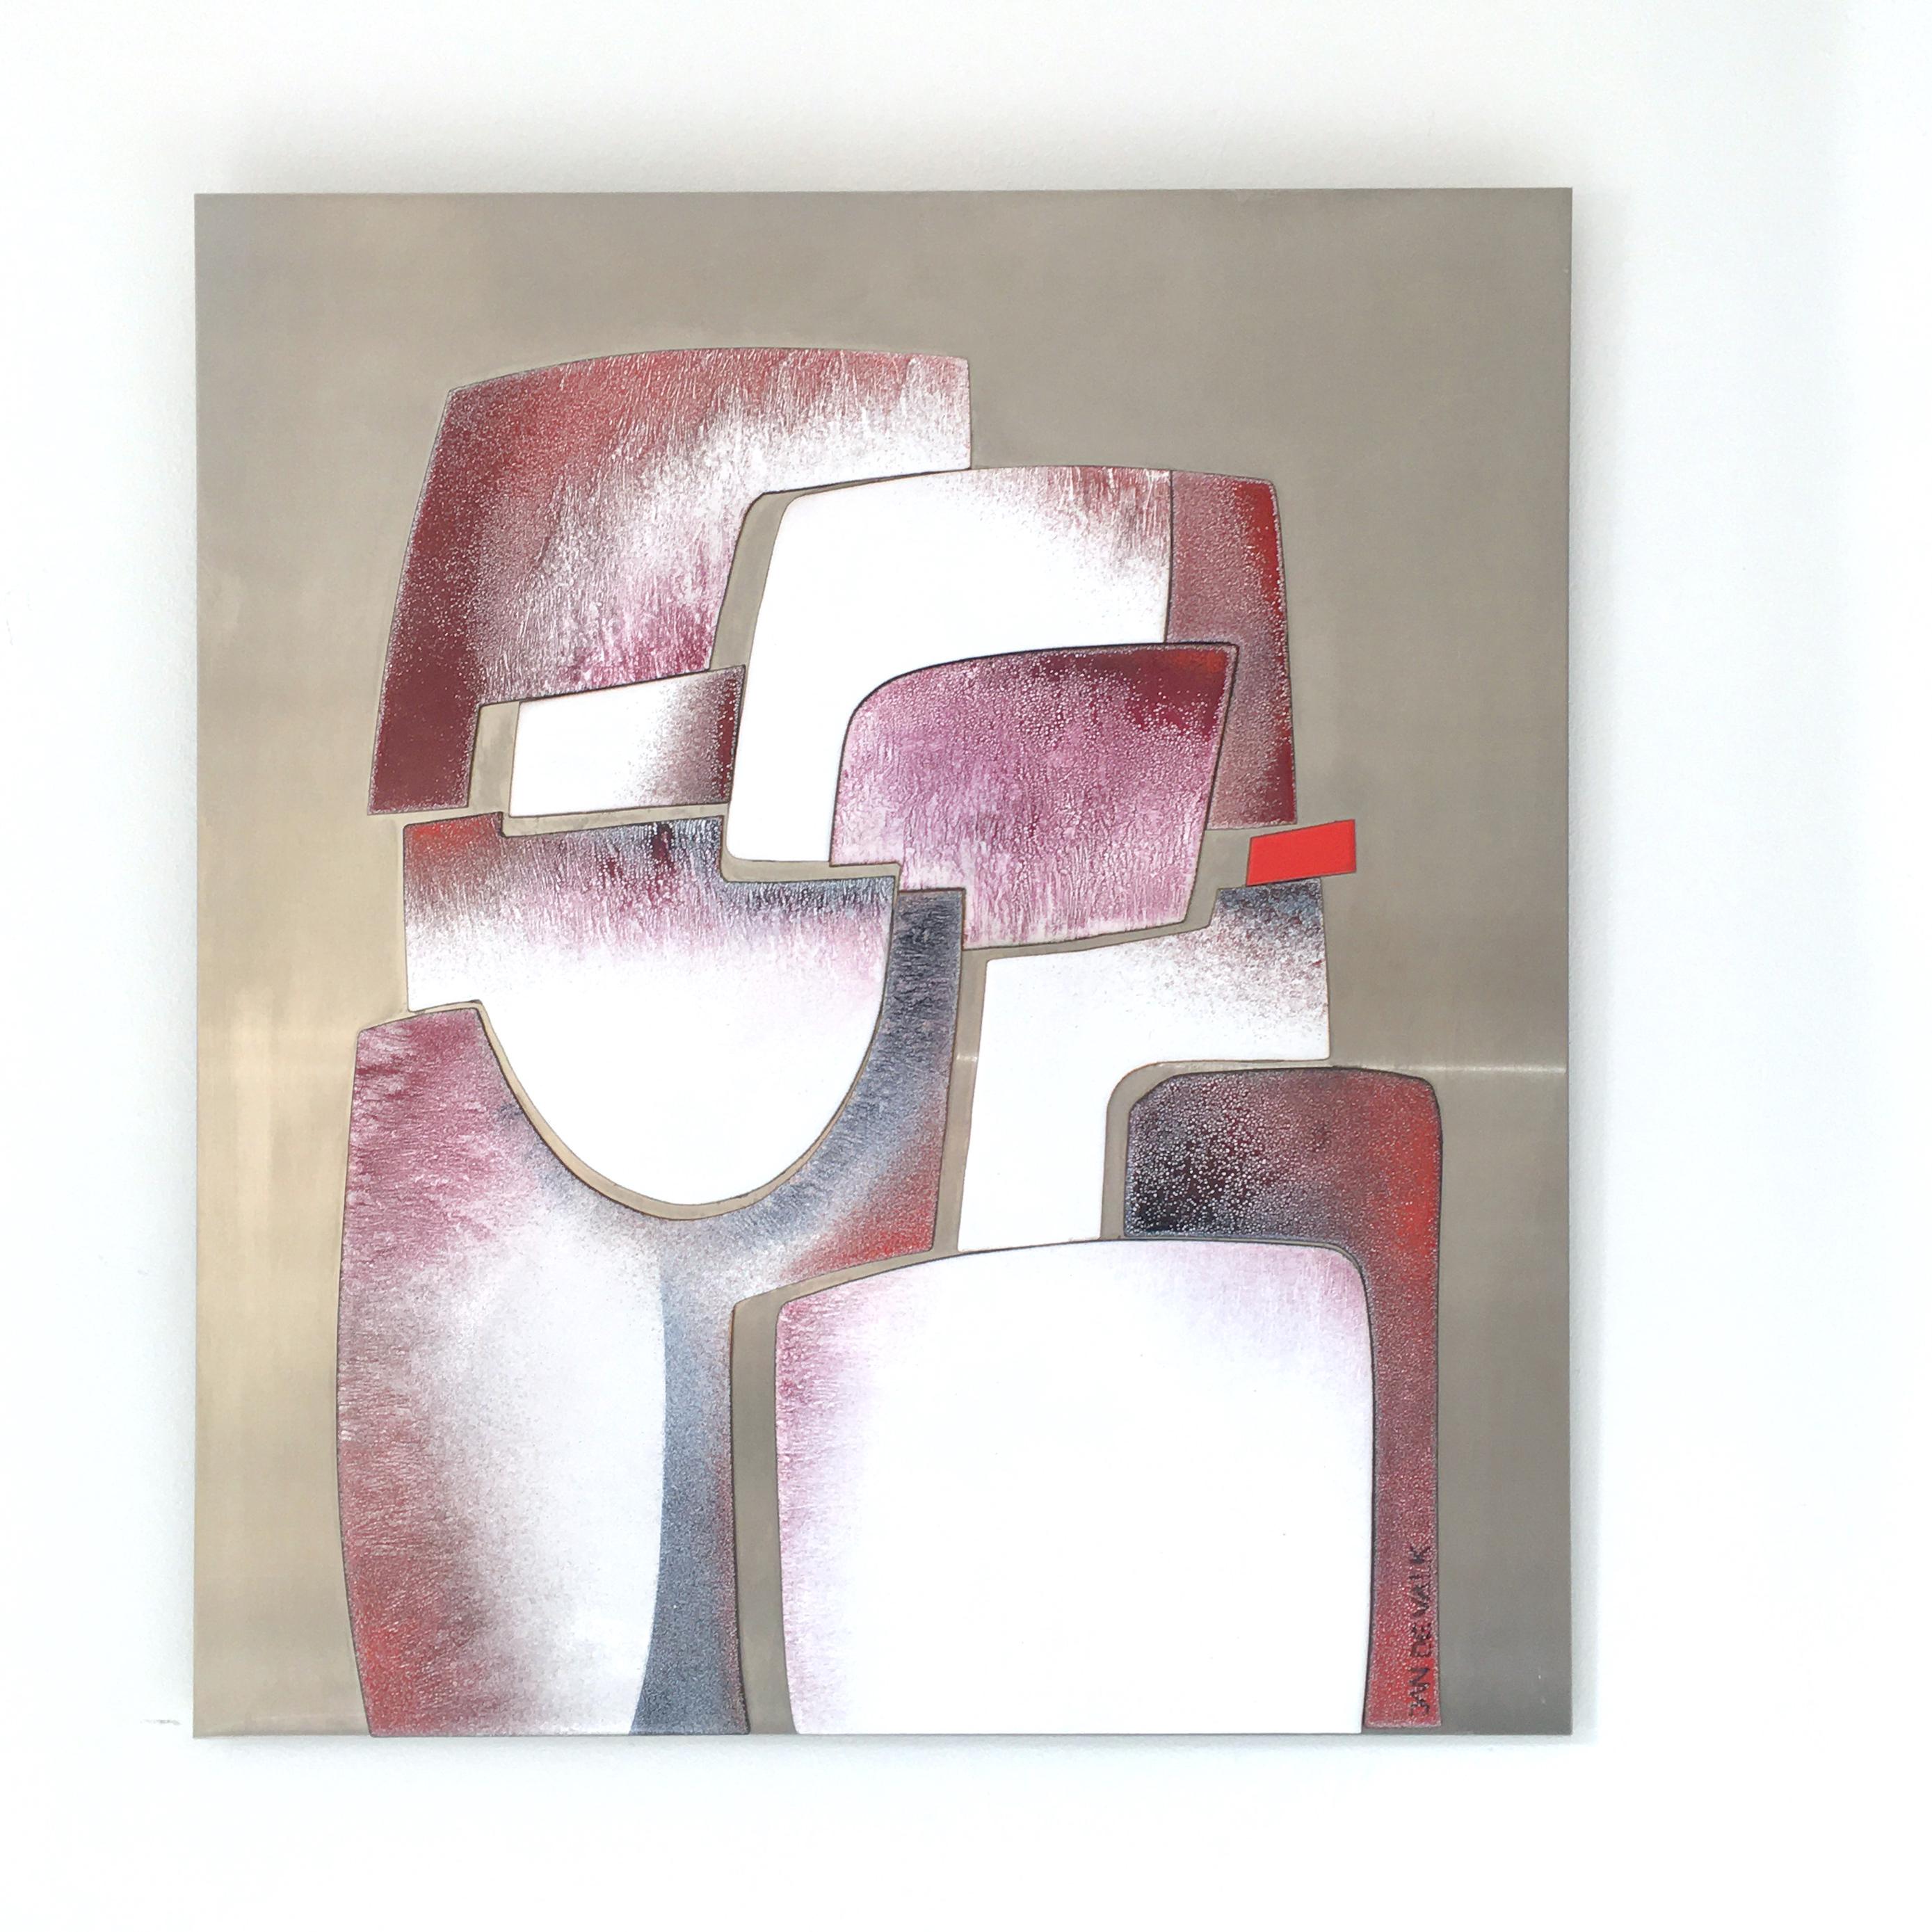 Mid-Century Modern Brutalist Abstract Enamel Wall Artwork in Red Tones, 1980s